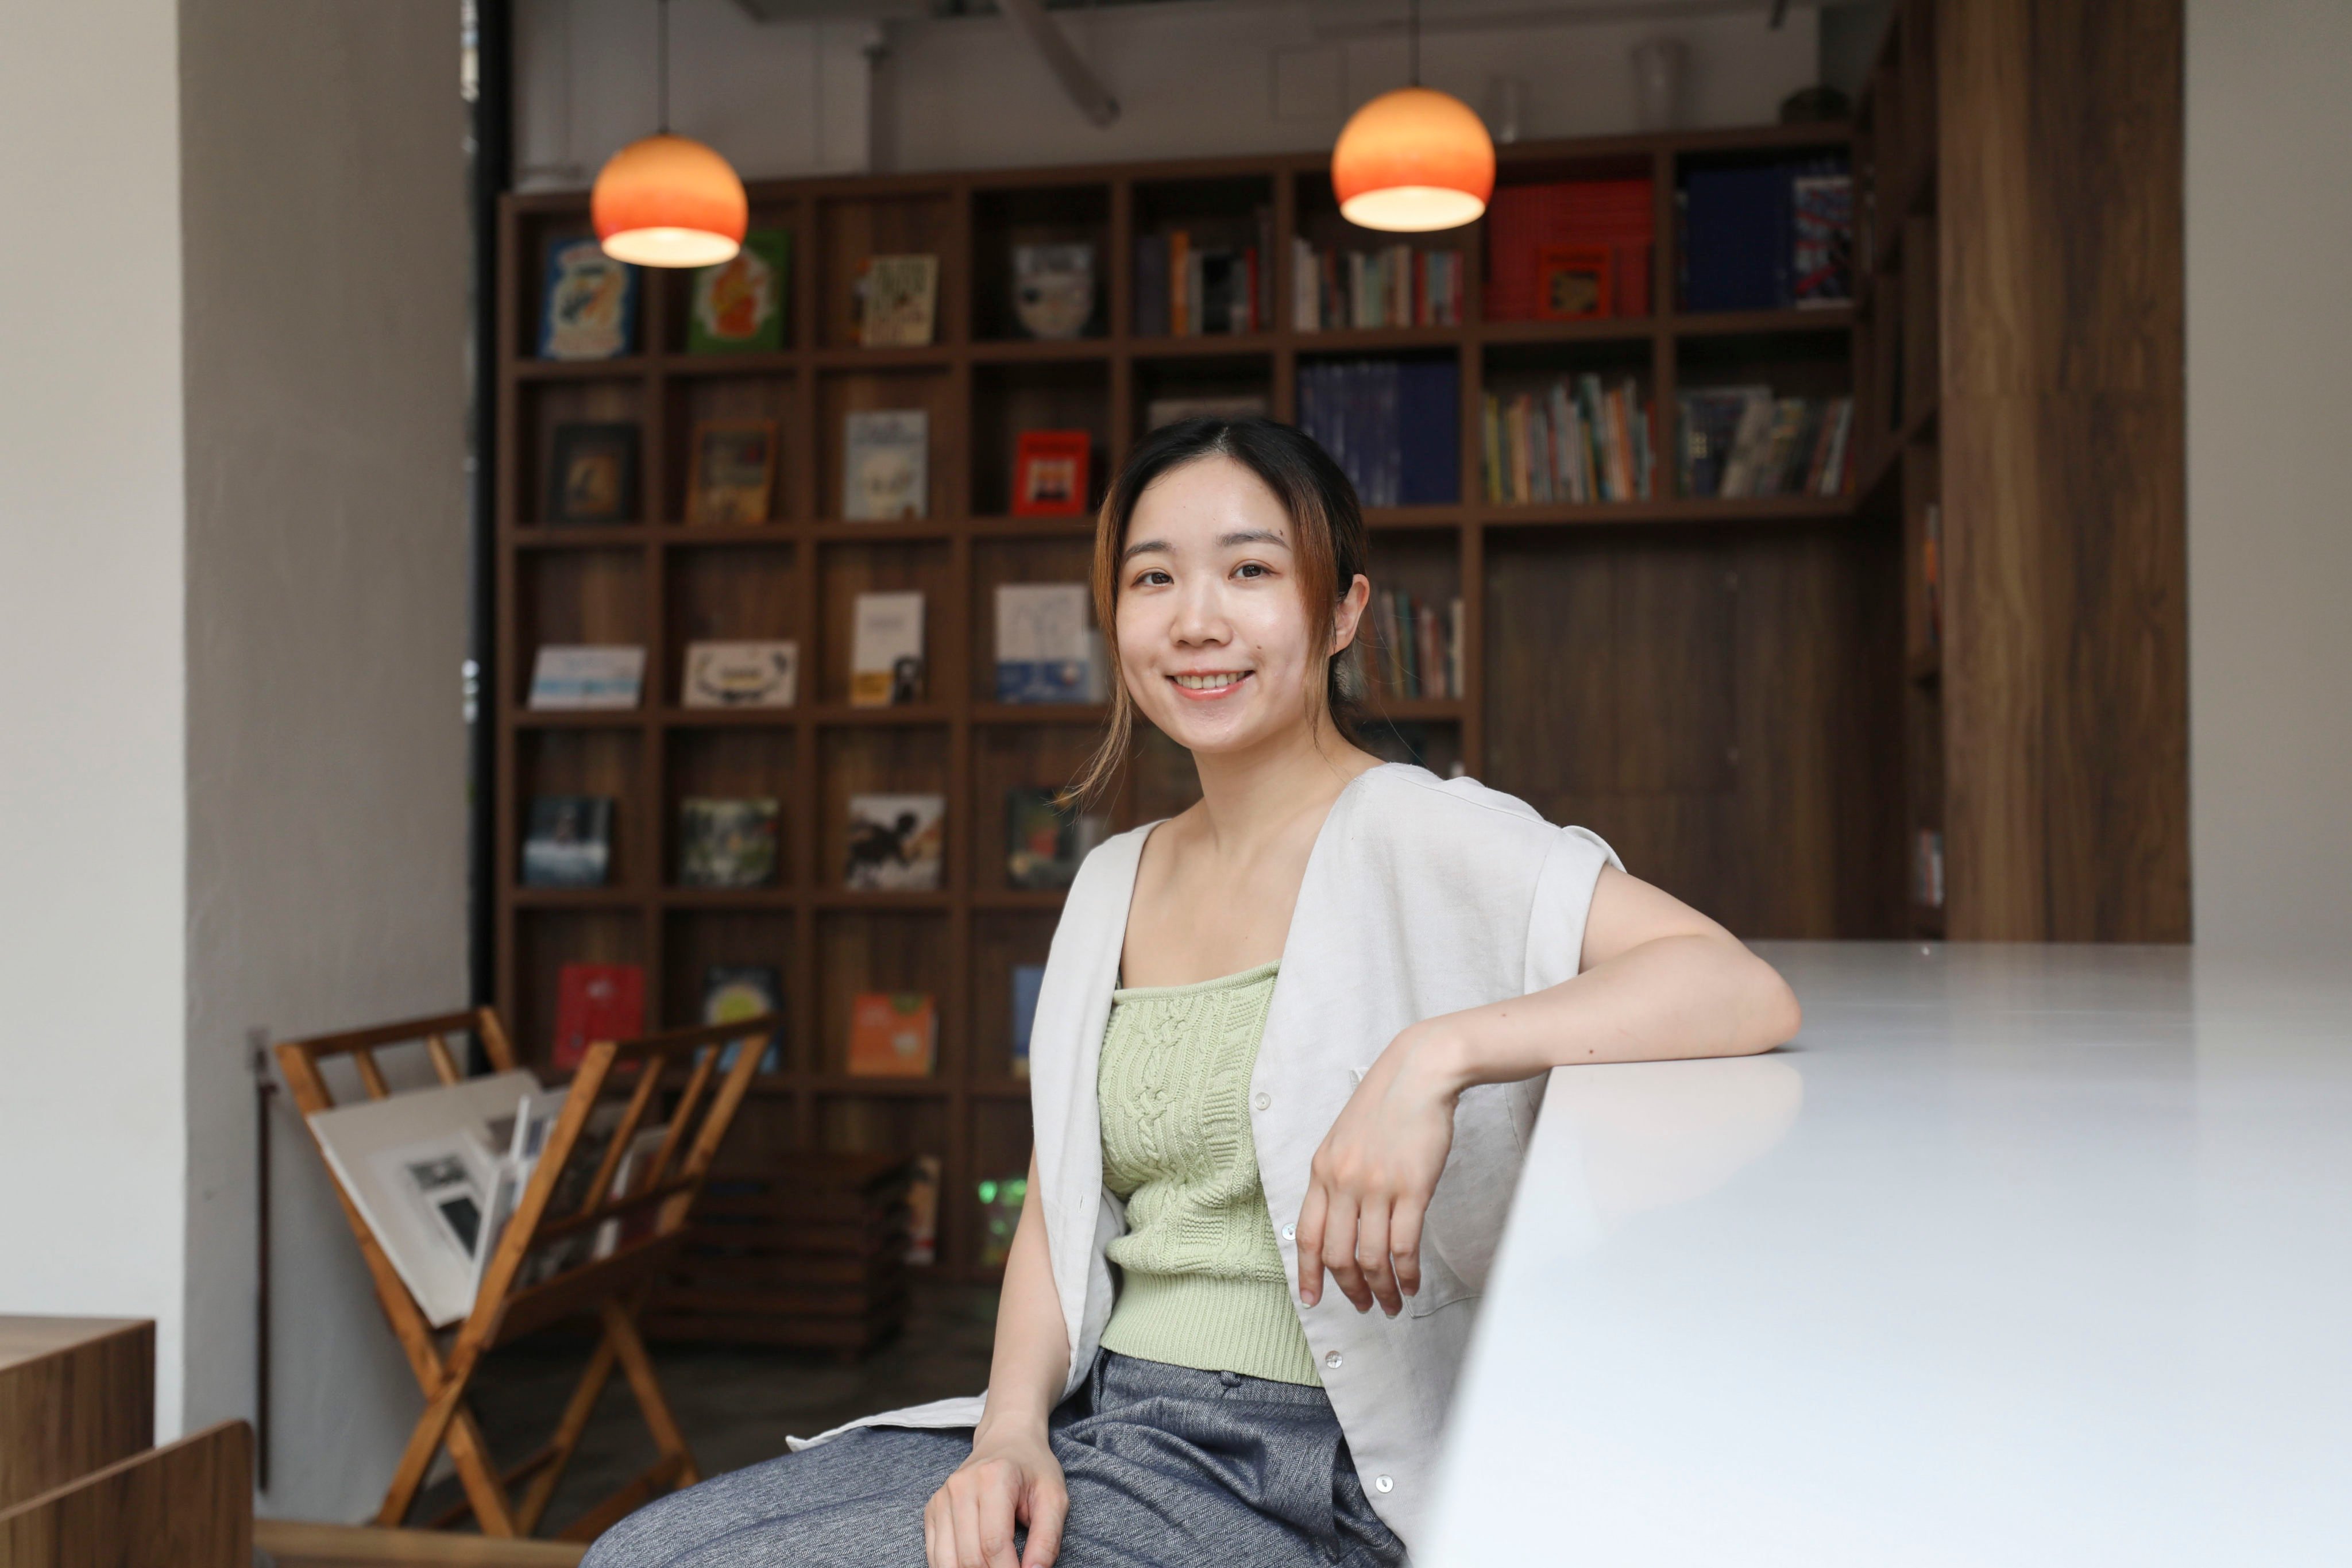 Alice Lee Hoi-yee, founder of Ztoryhome, tells the Post why she created the multipurpose creative space and cafe in Sai Ying Pun, Hong Kong. Photo: Xiaomei Chen